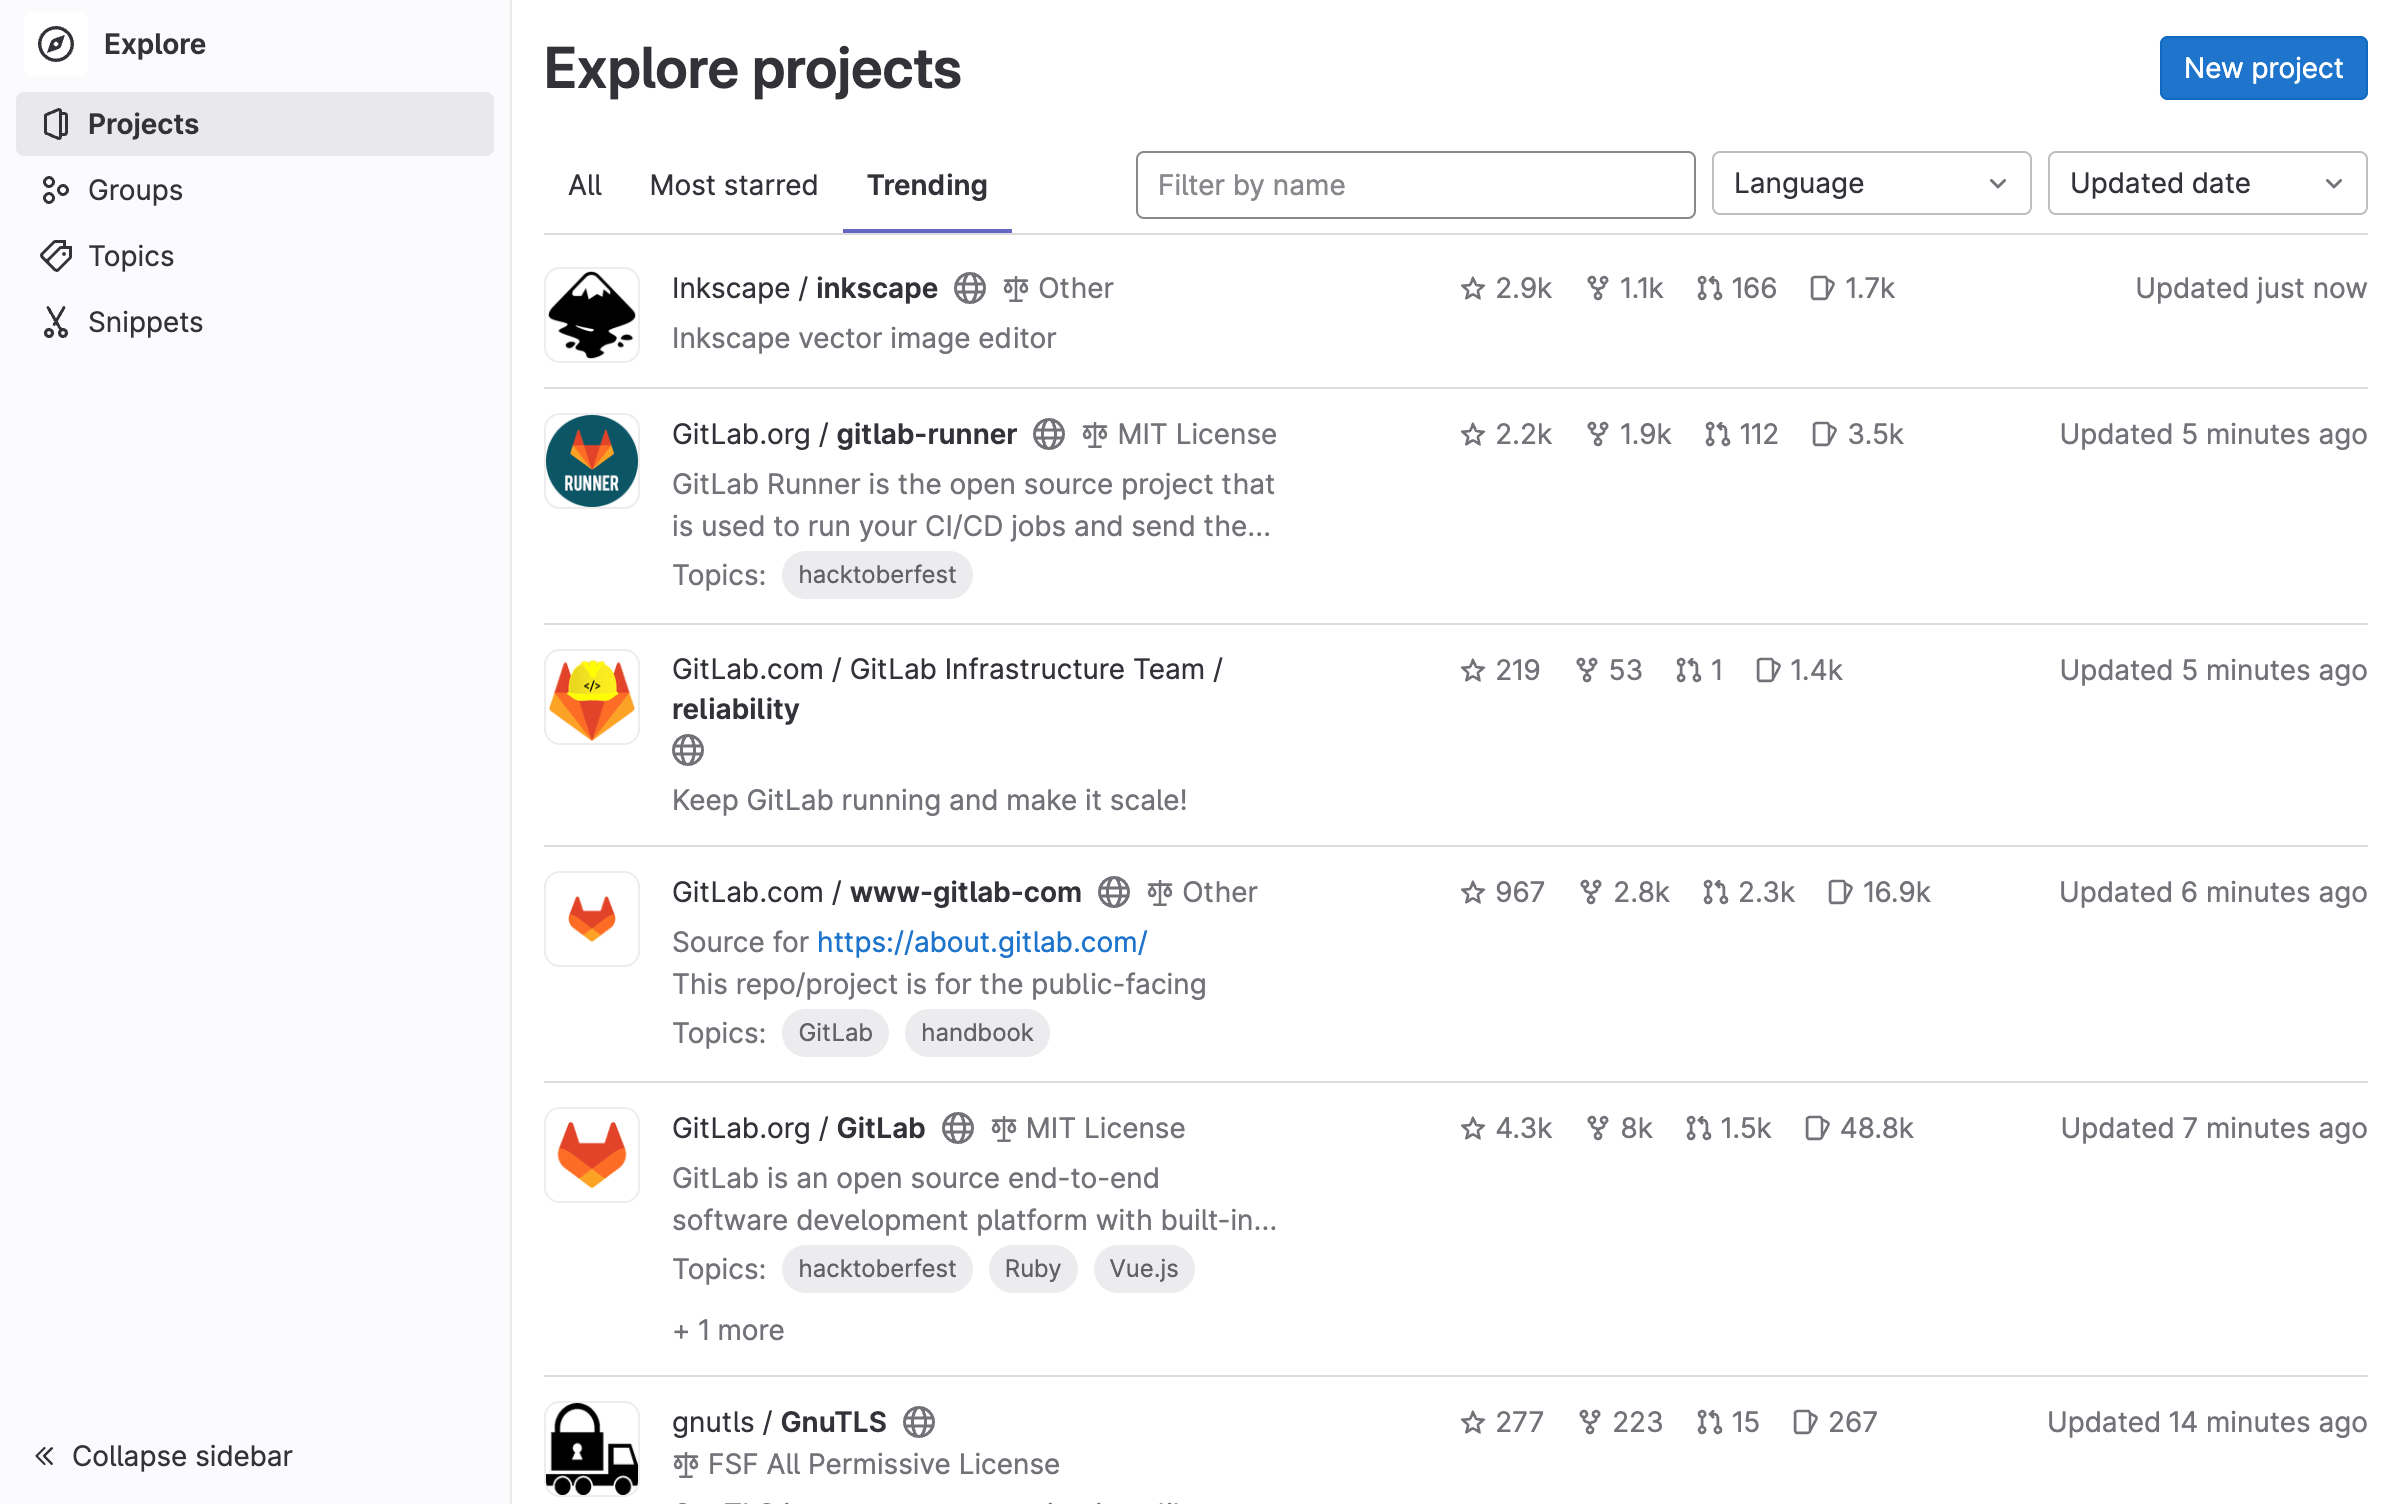 Explore projects, groups, snippets, and topics